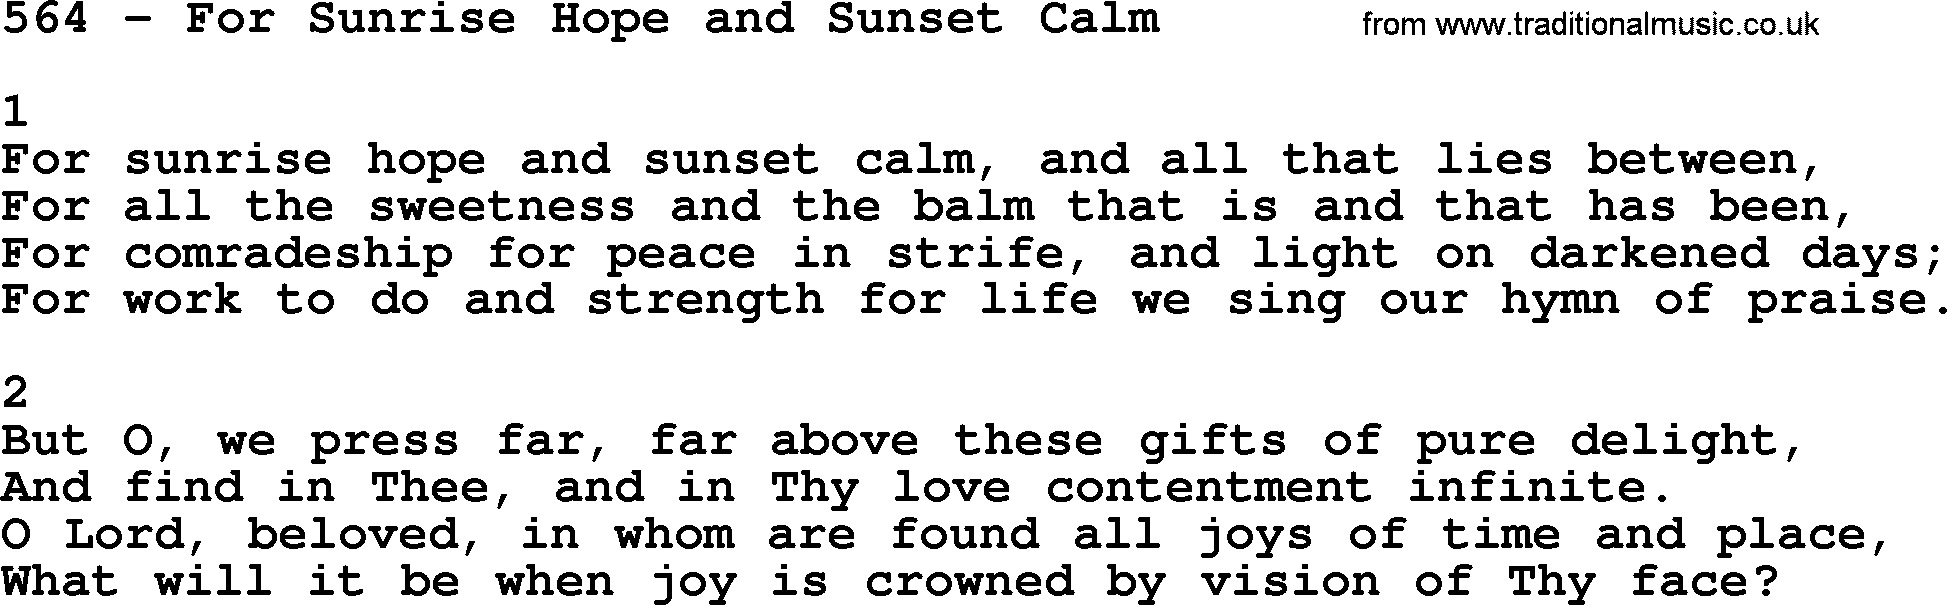 Complete Adventis Hymnal, title: 564-For Sunrise Hope And Sunset Calm, with lyrics, midi, mp3, powerpoints(PPT) and PDF,